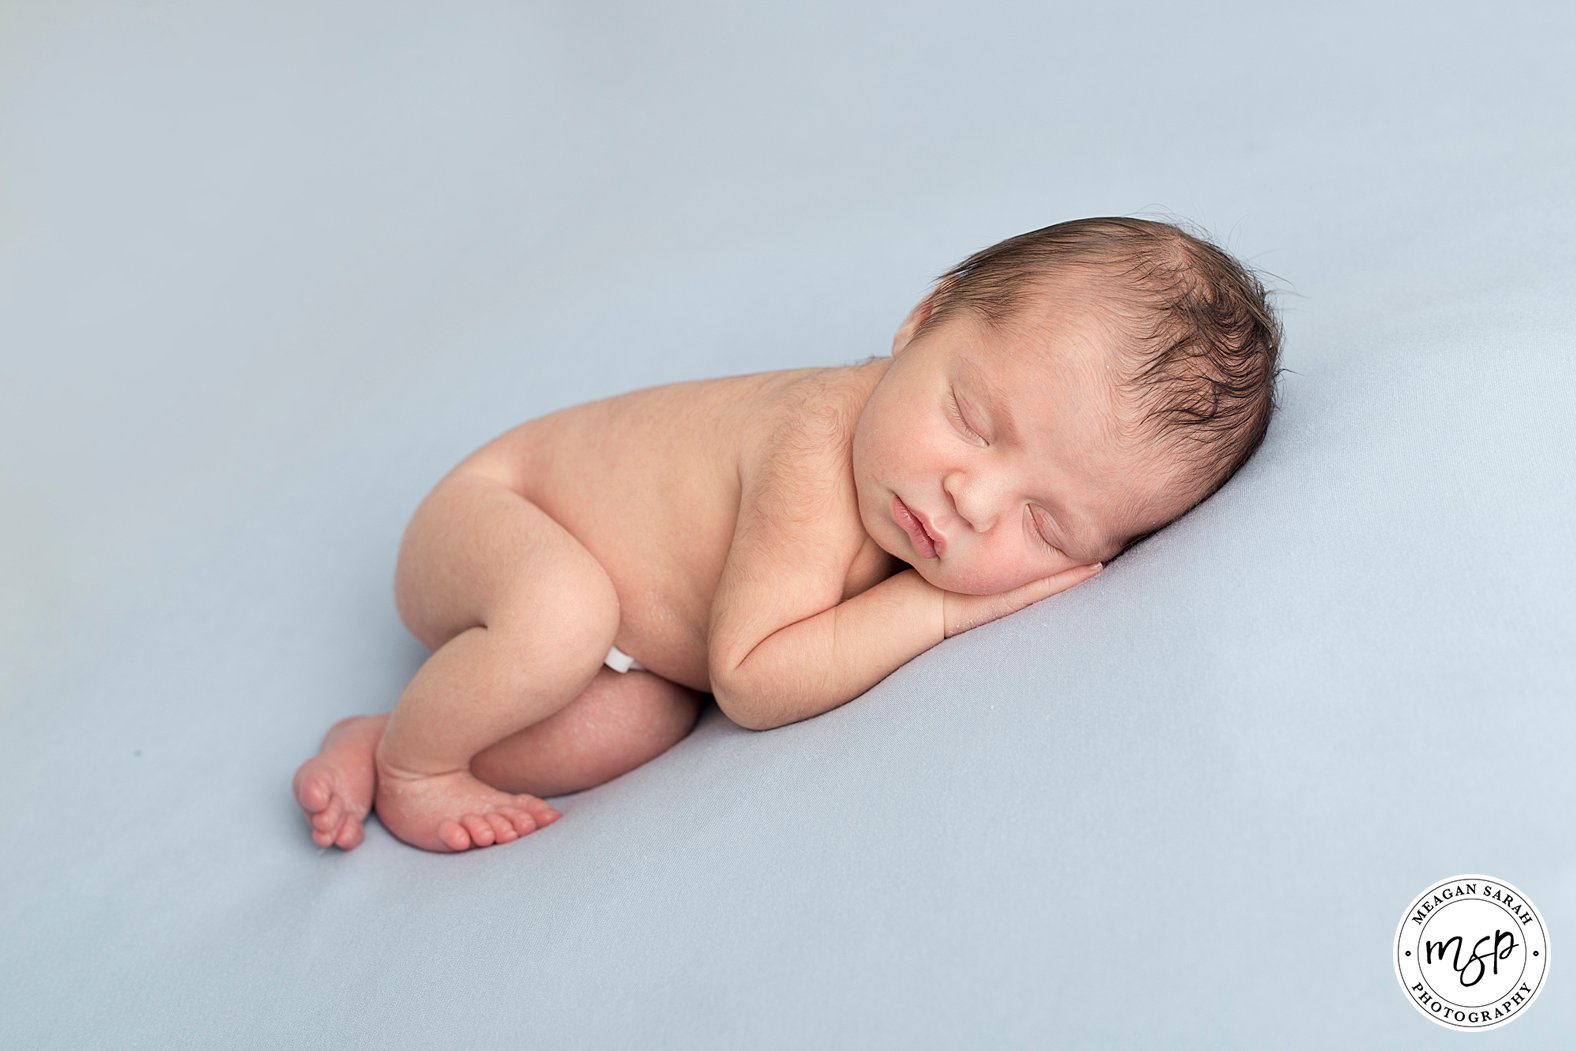 Blue,Baby Photographer Leeds,Baby Photography Leeds,Leeds Newborn Photographer,Leeds Newborn Photography,Leeds Photographer,Professional Photographer in Leeds,West Yorkshire Photographer,Yorkshire Newborn Photographer,Yorkshire Newborn Photography,Side,